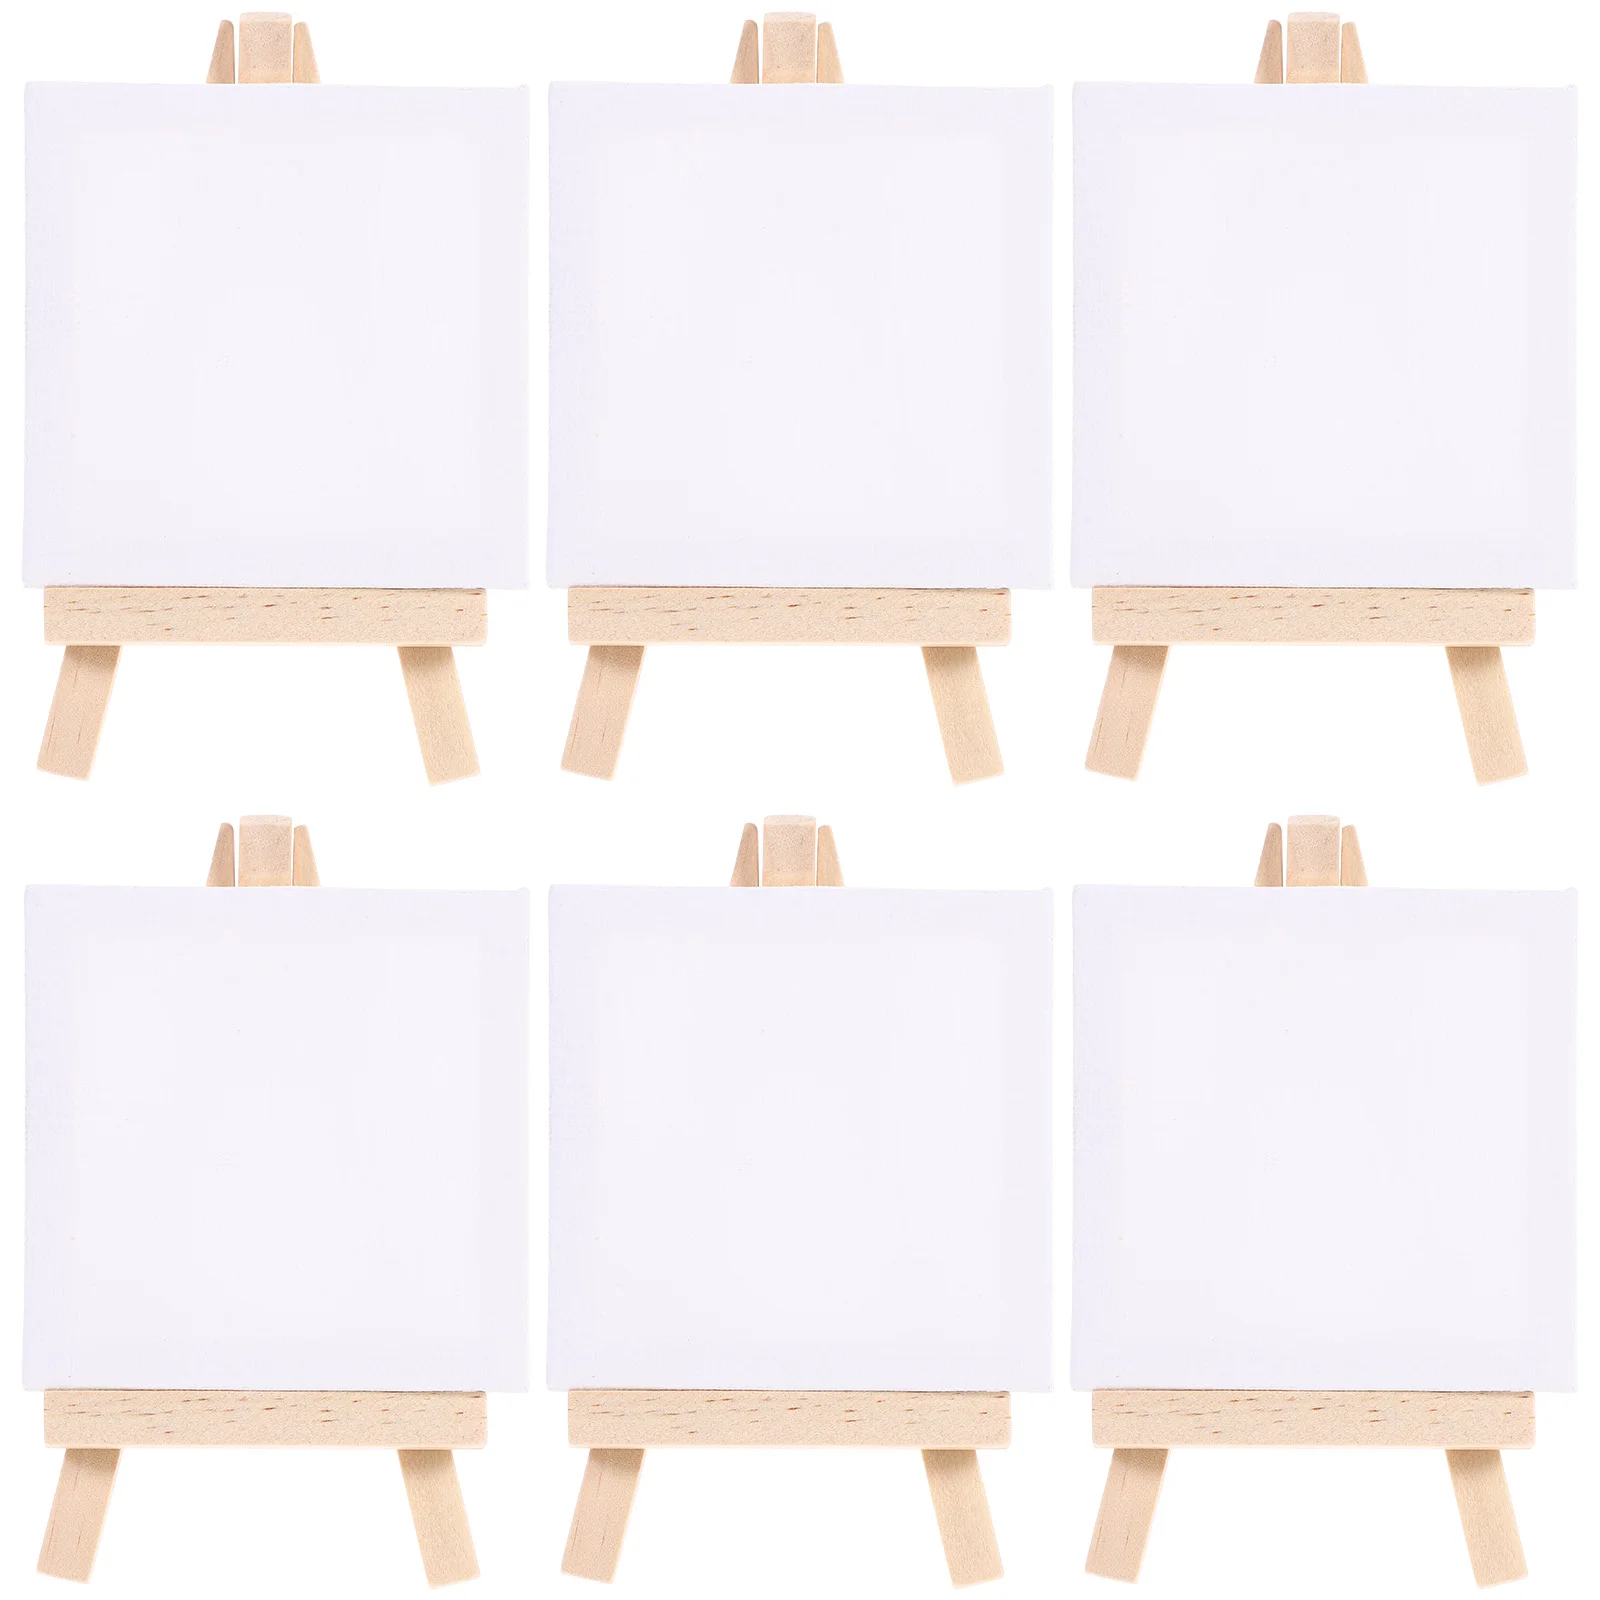 6/12 Sets of White Paint Stretched Artist Canvas Board White Blank Boards Wooden Oil Paint Artwork painting Board(White)